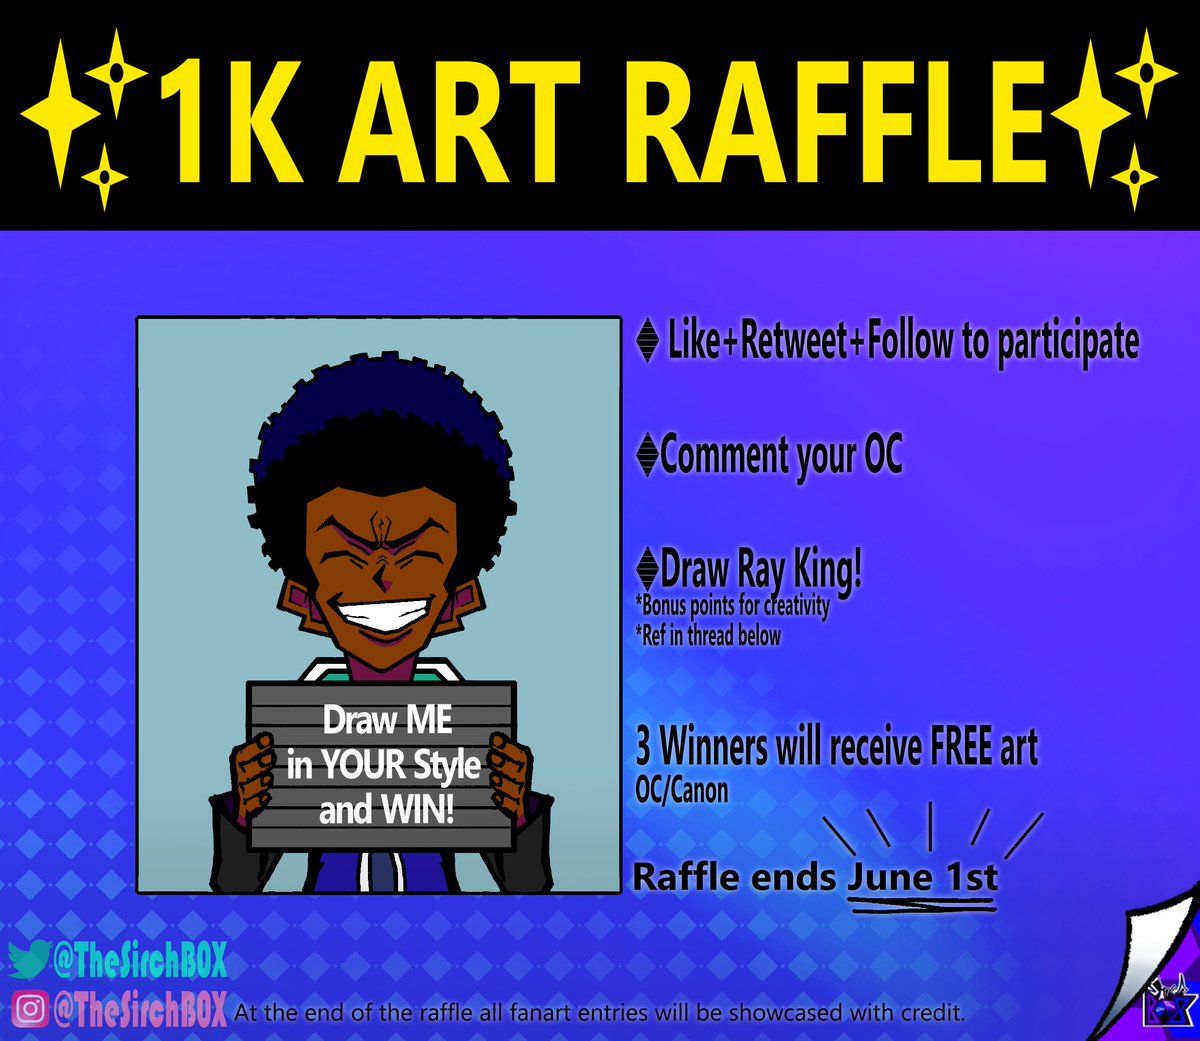 ON APRIL 19TH WE REACHED 1K FOLLOWERS!!! Let's all celebrate this milestone with a ✨1K ART RAFFLE!✨ 🔷Like + Retweet + Follow 🔷Draw Ray King in your style 🔷3 contestants will win FREE Art 🔷Deadline on June 1st Thanks to everyone for the support!😎👍 #Artmoots